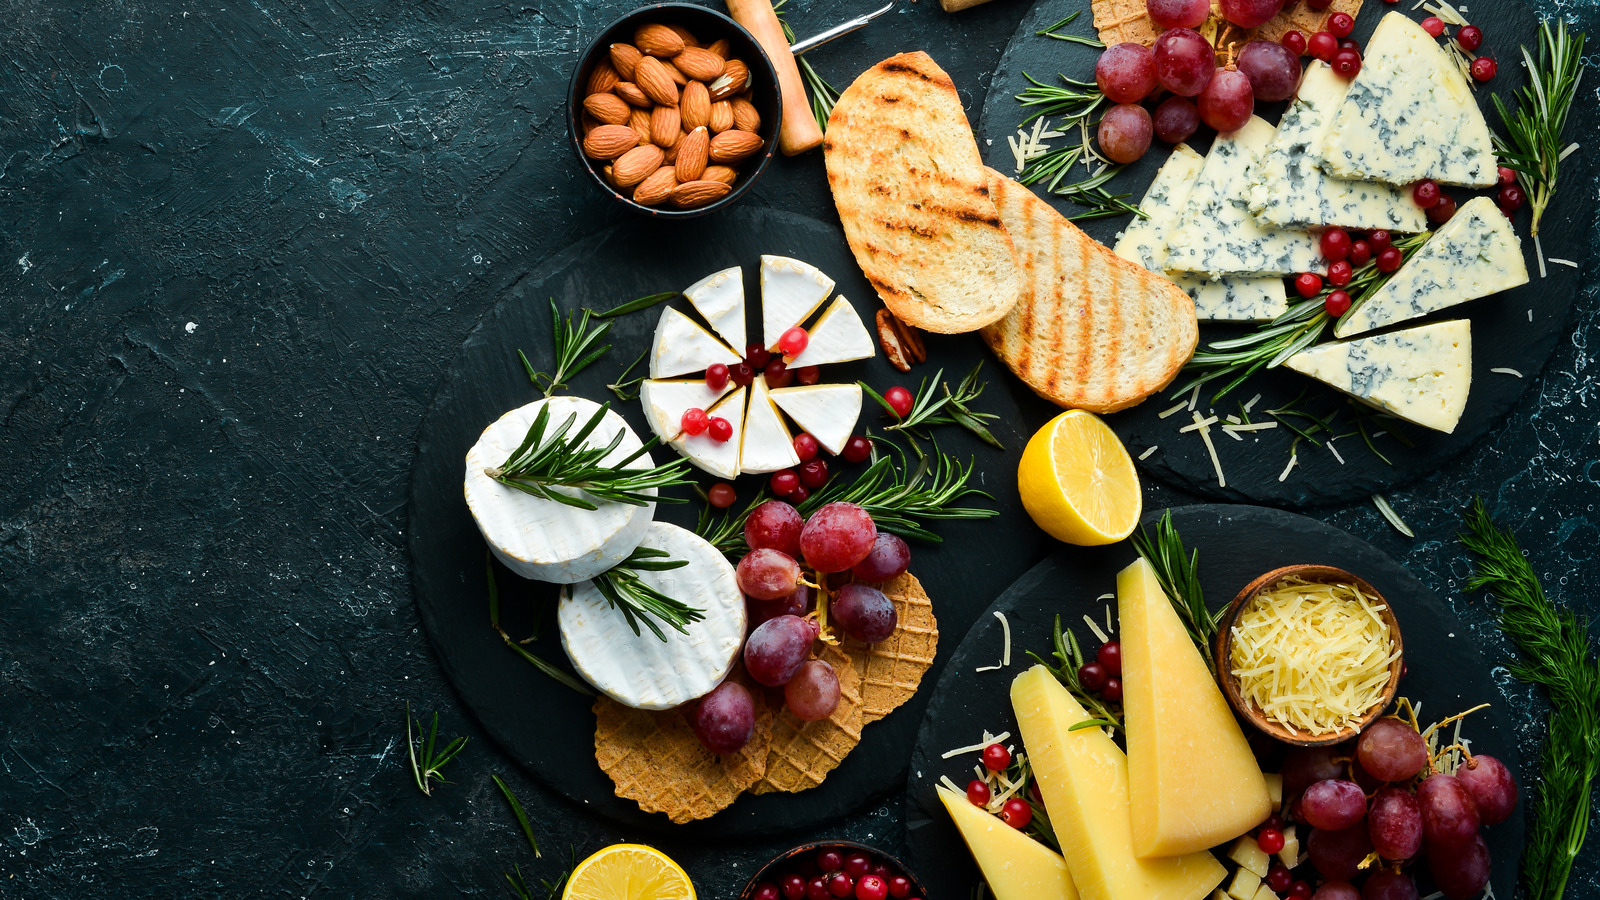 https://www.foodrepublic.com/img/gallery/easy-tips-for-arranging-better-cheese-boards/l-intro-1695847034.jpg